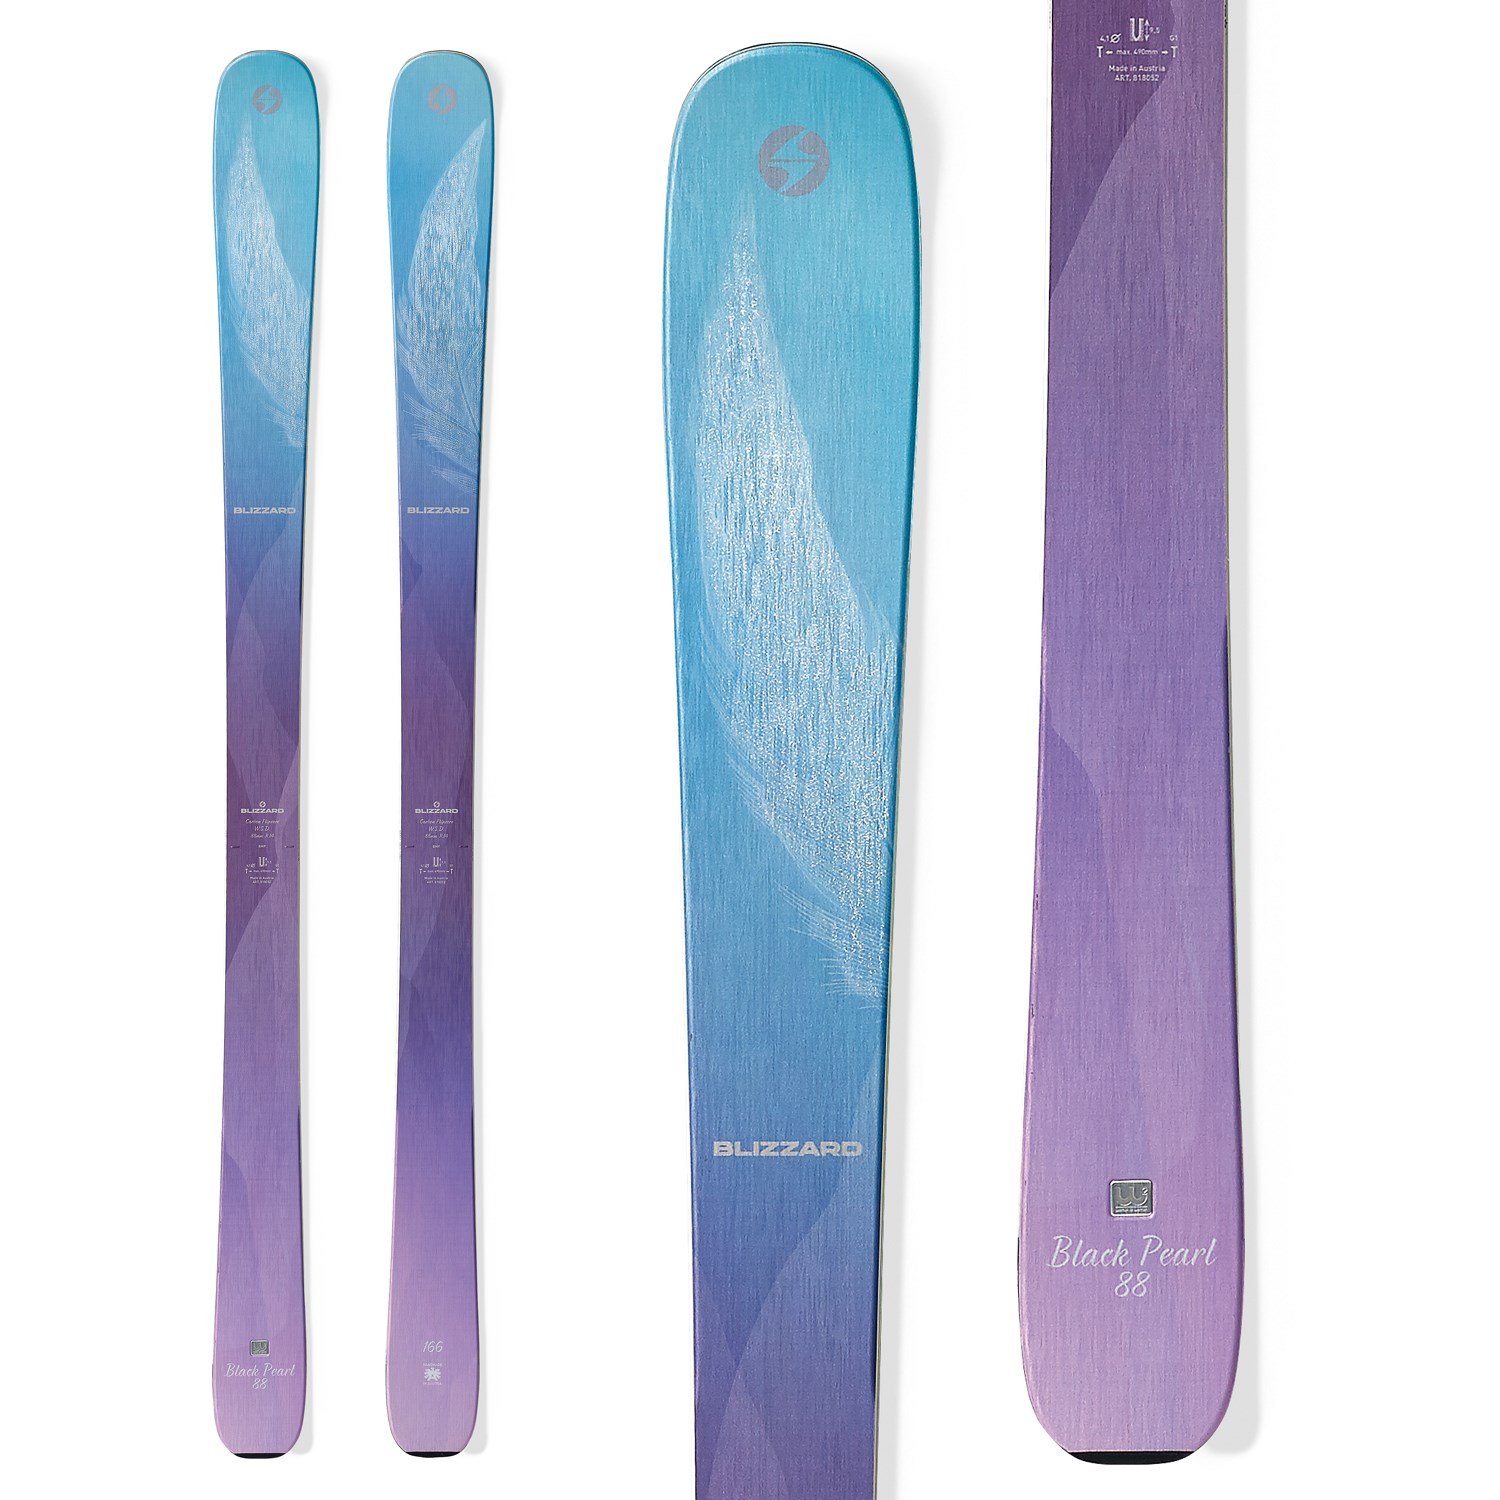 159cm Without Bindings / Flat Blizzard 2020 Black Pearl 88 Skis NEW ! 